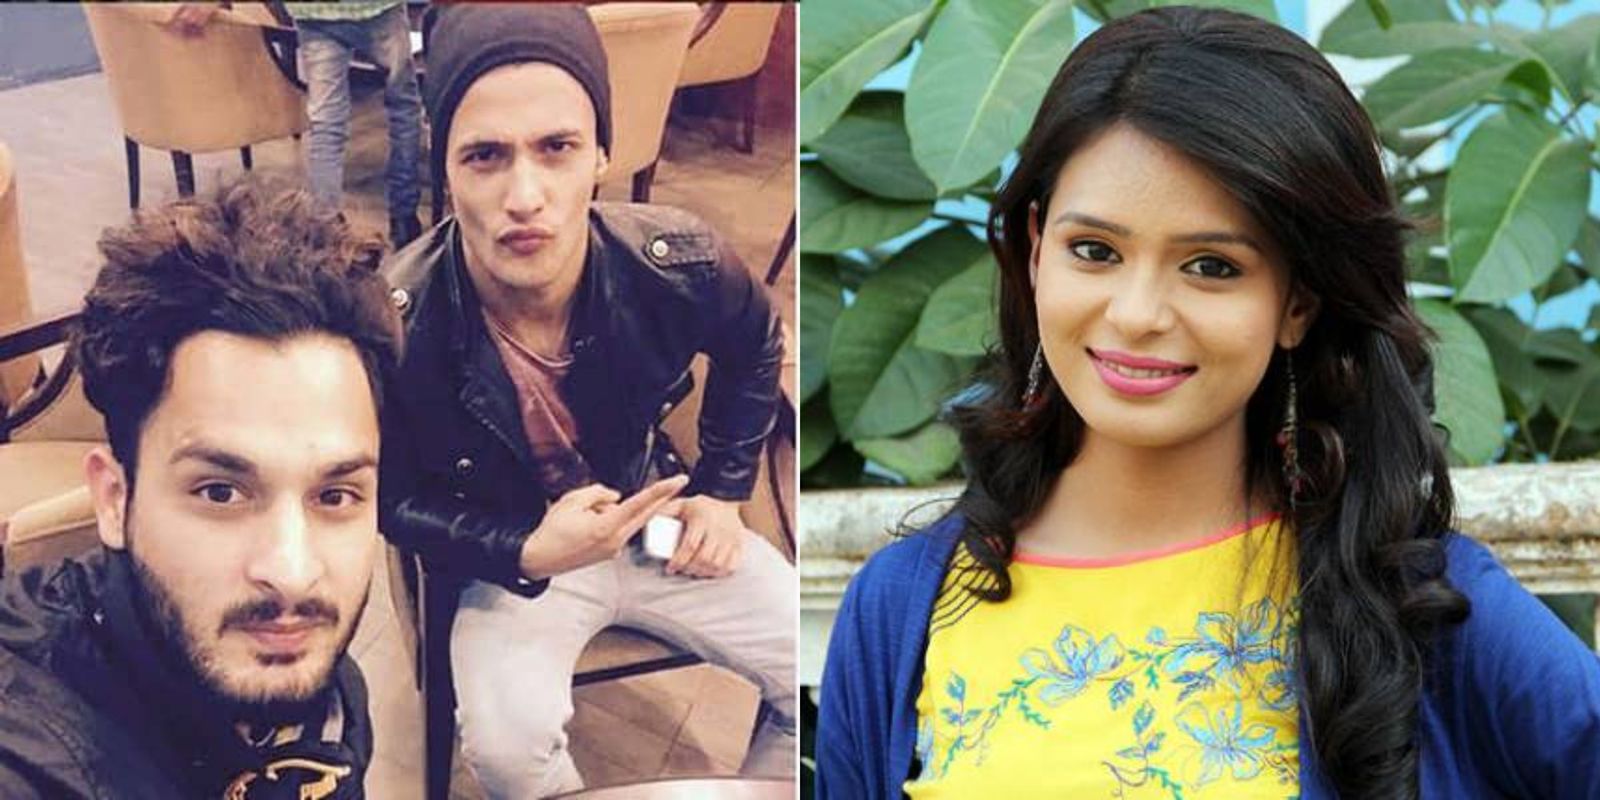 Bigg Boss 13: Asim’s Brother Umar Riaz Slams Sonal Vengurlekar For Calling Him Fame Hungry; Says ‘She Doesn’t Know Asim’